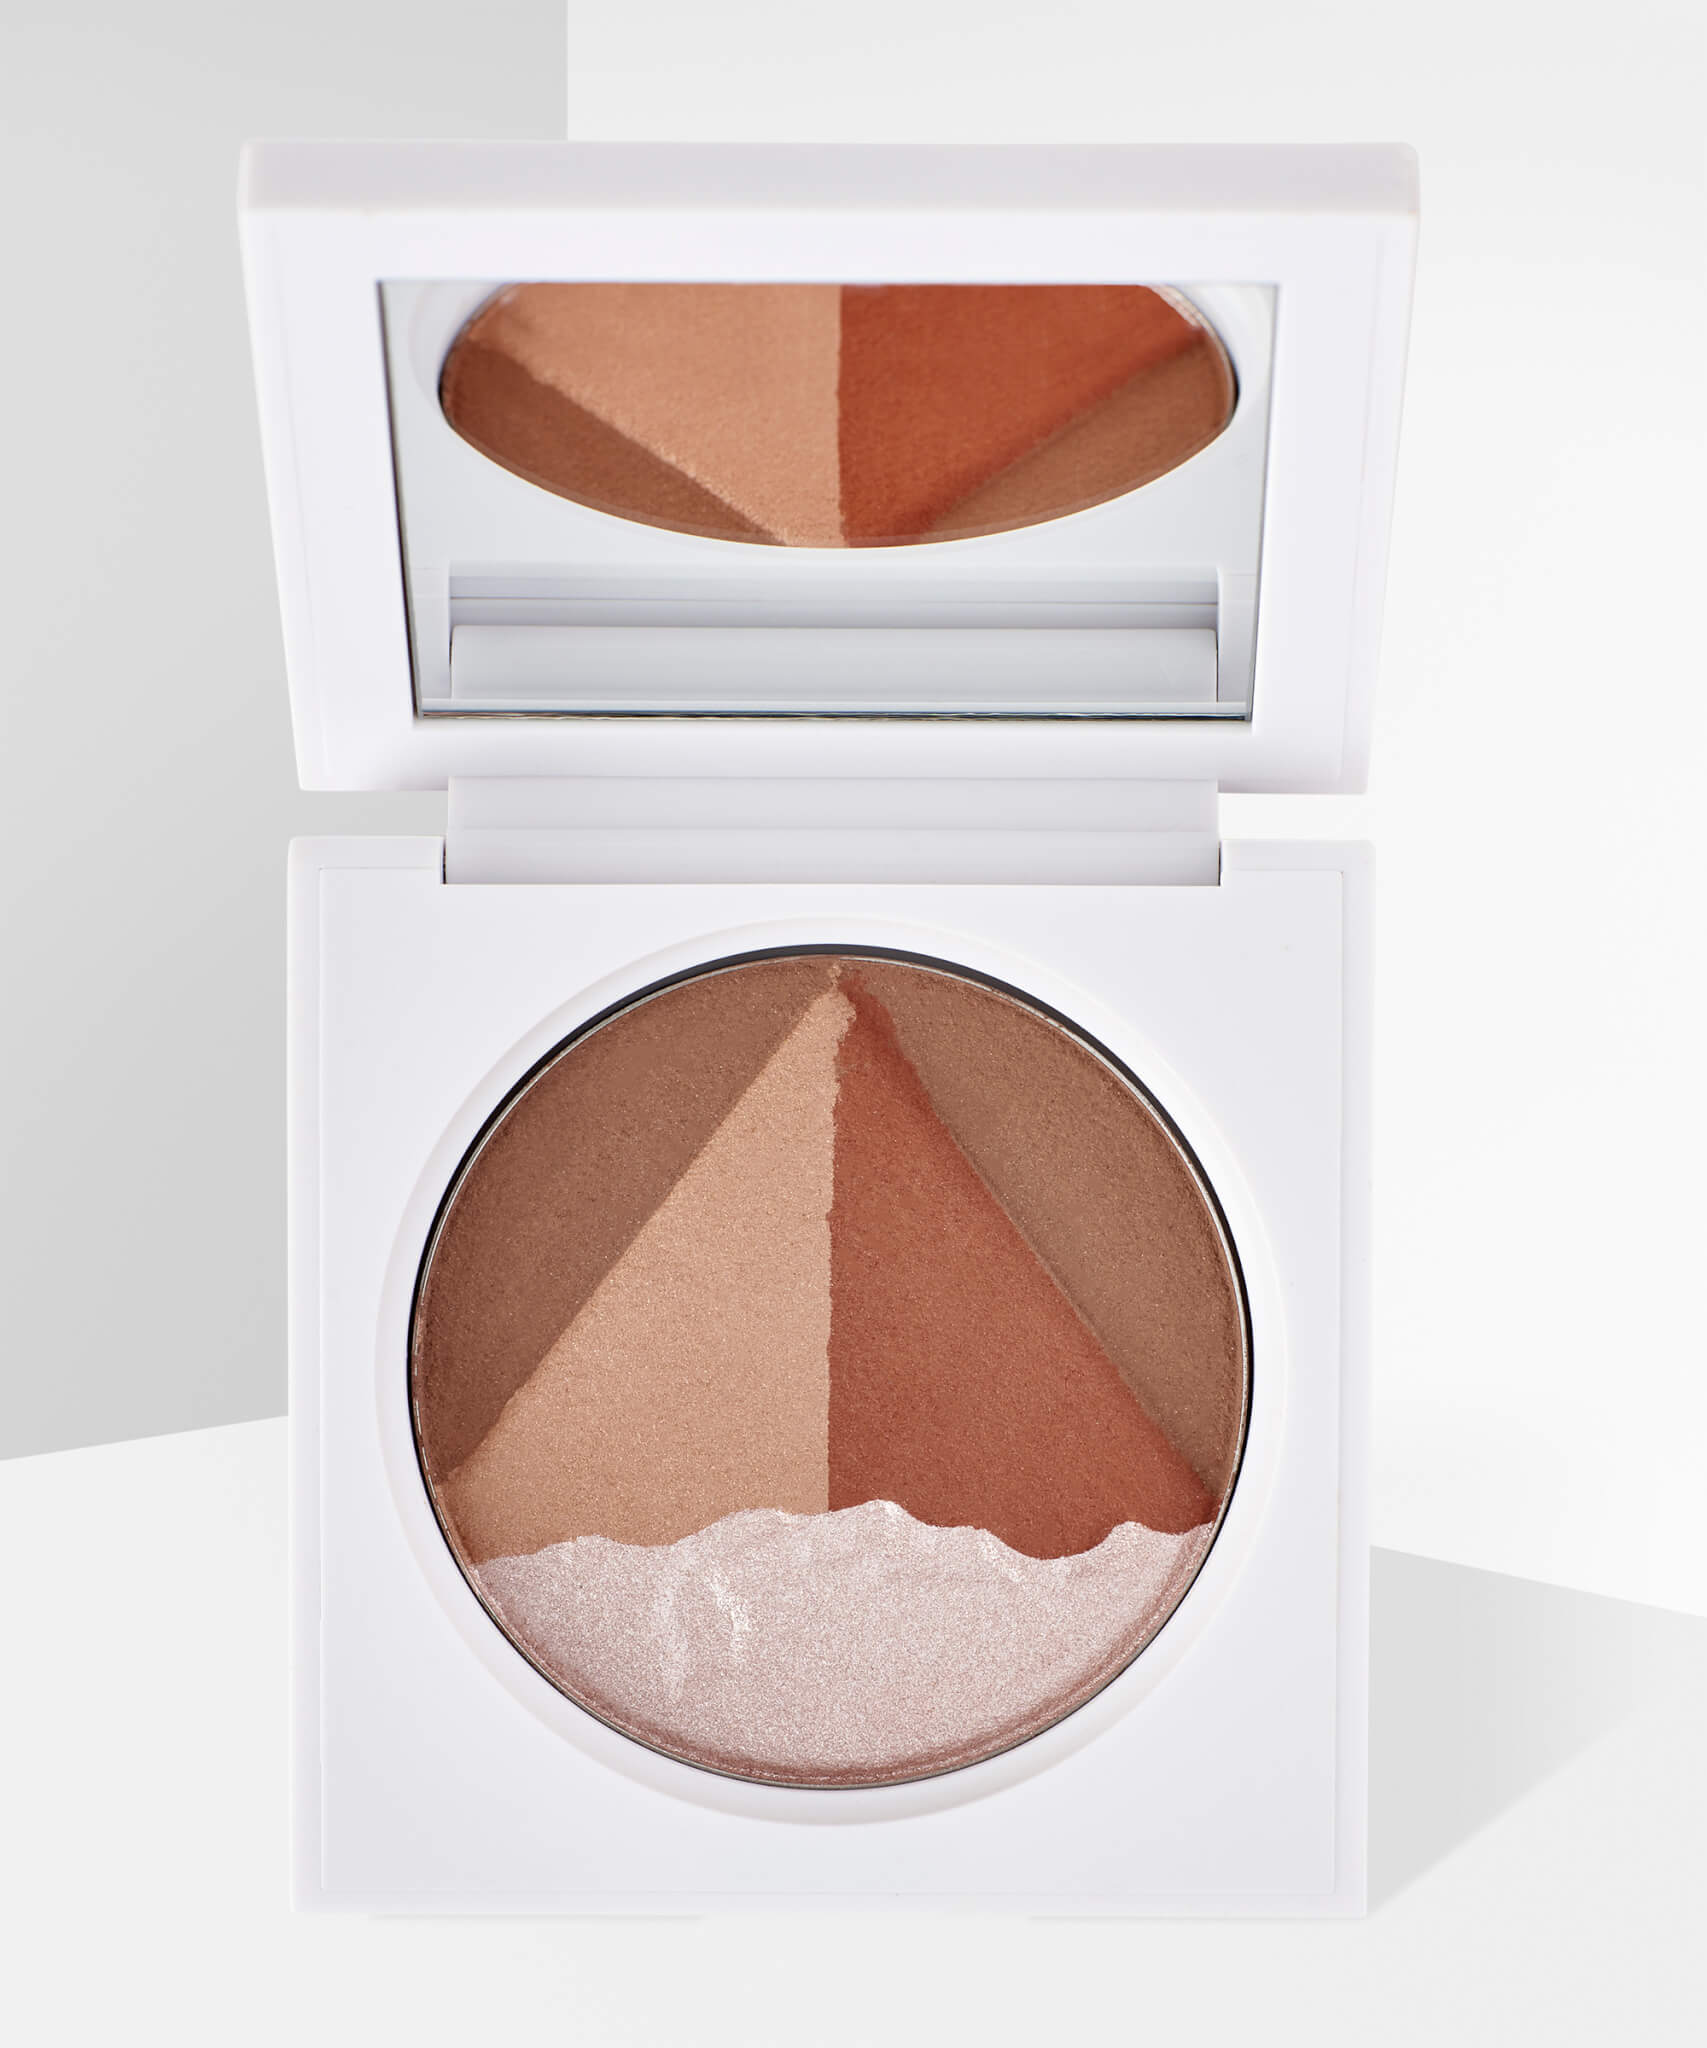 OFRA 3D Pyramid Egyptian Clay Bronzer $272.3 (原價：$389)